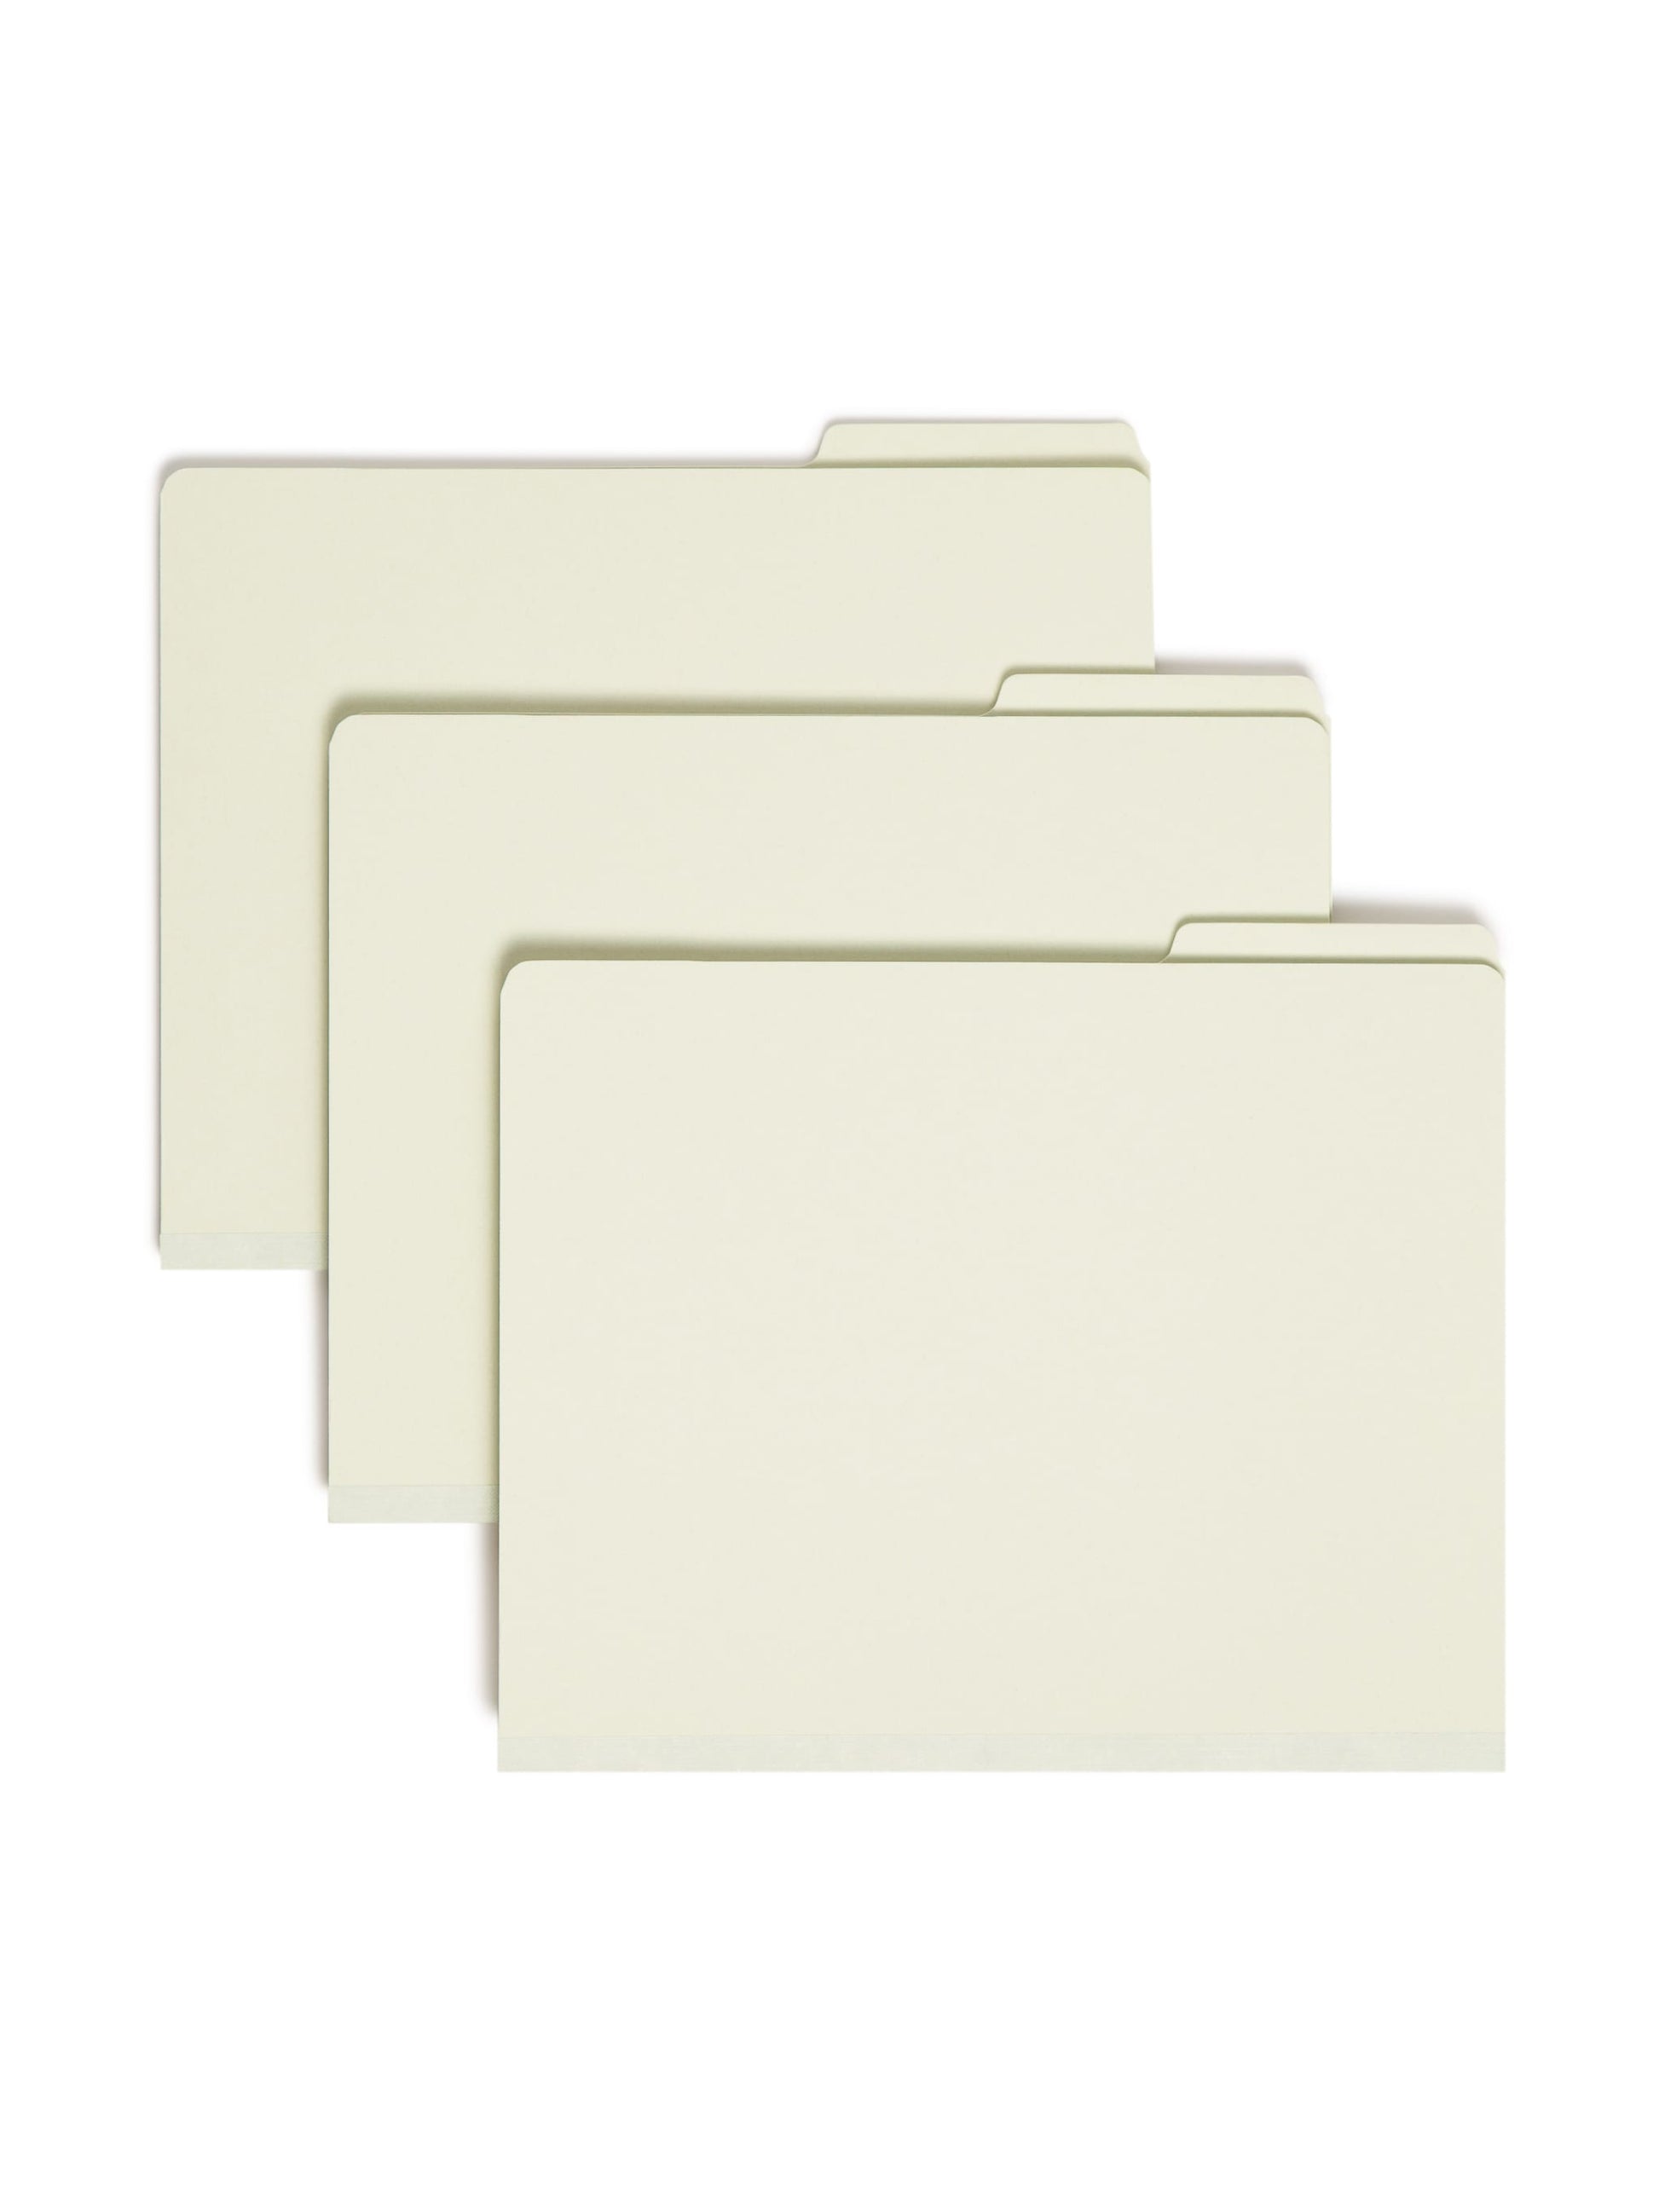 SafeSHIELD® Pressboard Classification File Folders, 2 Dividers, 2 inch Expansion, 1/3-Cut Tab, Gray/Green Color, Letter Size, Set of 0, 30086486142152